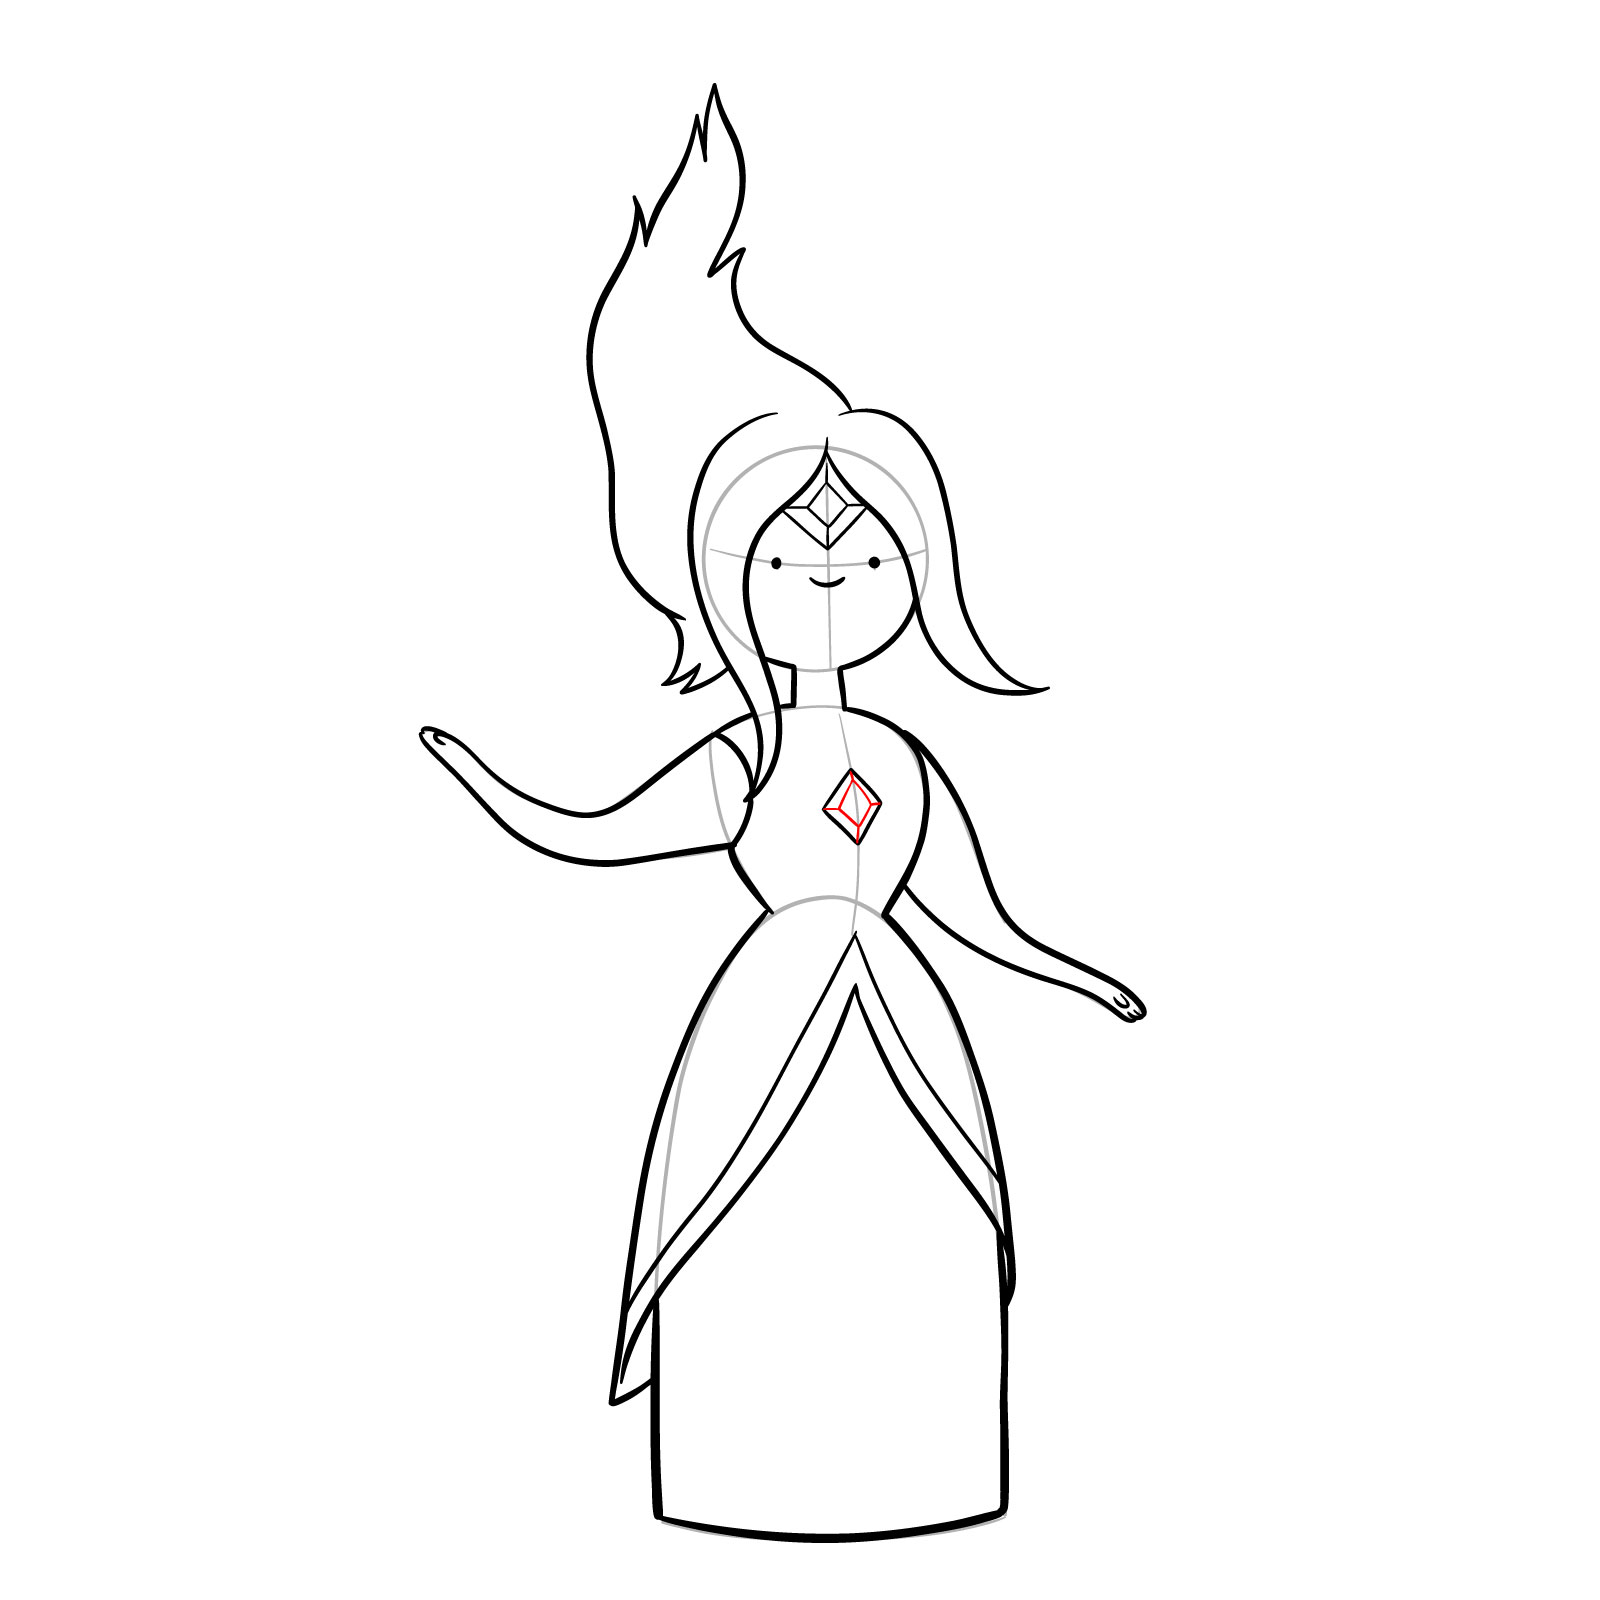 How to draw Flame Princess from Incendium Episode - step 18